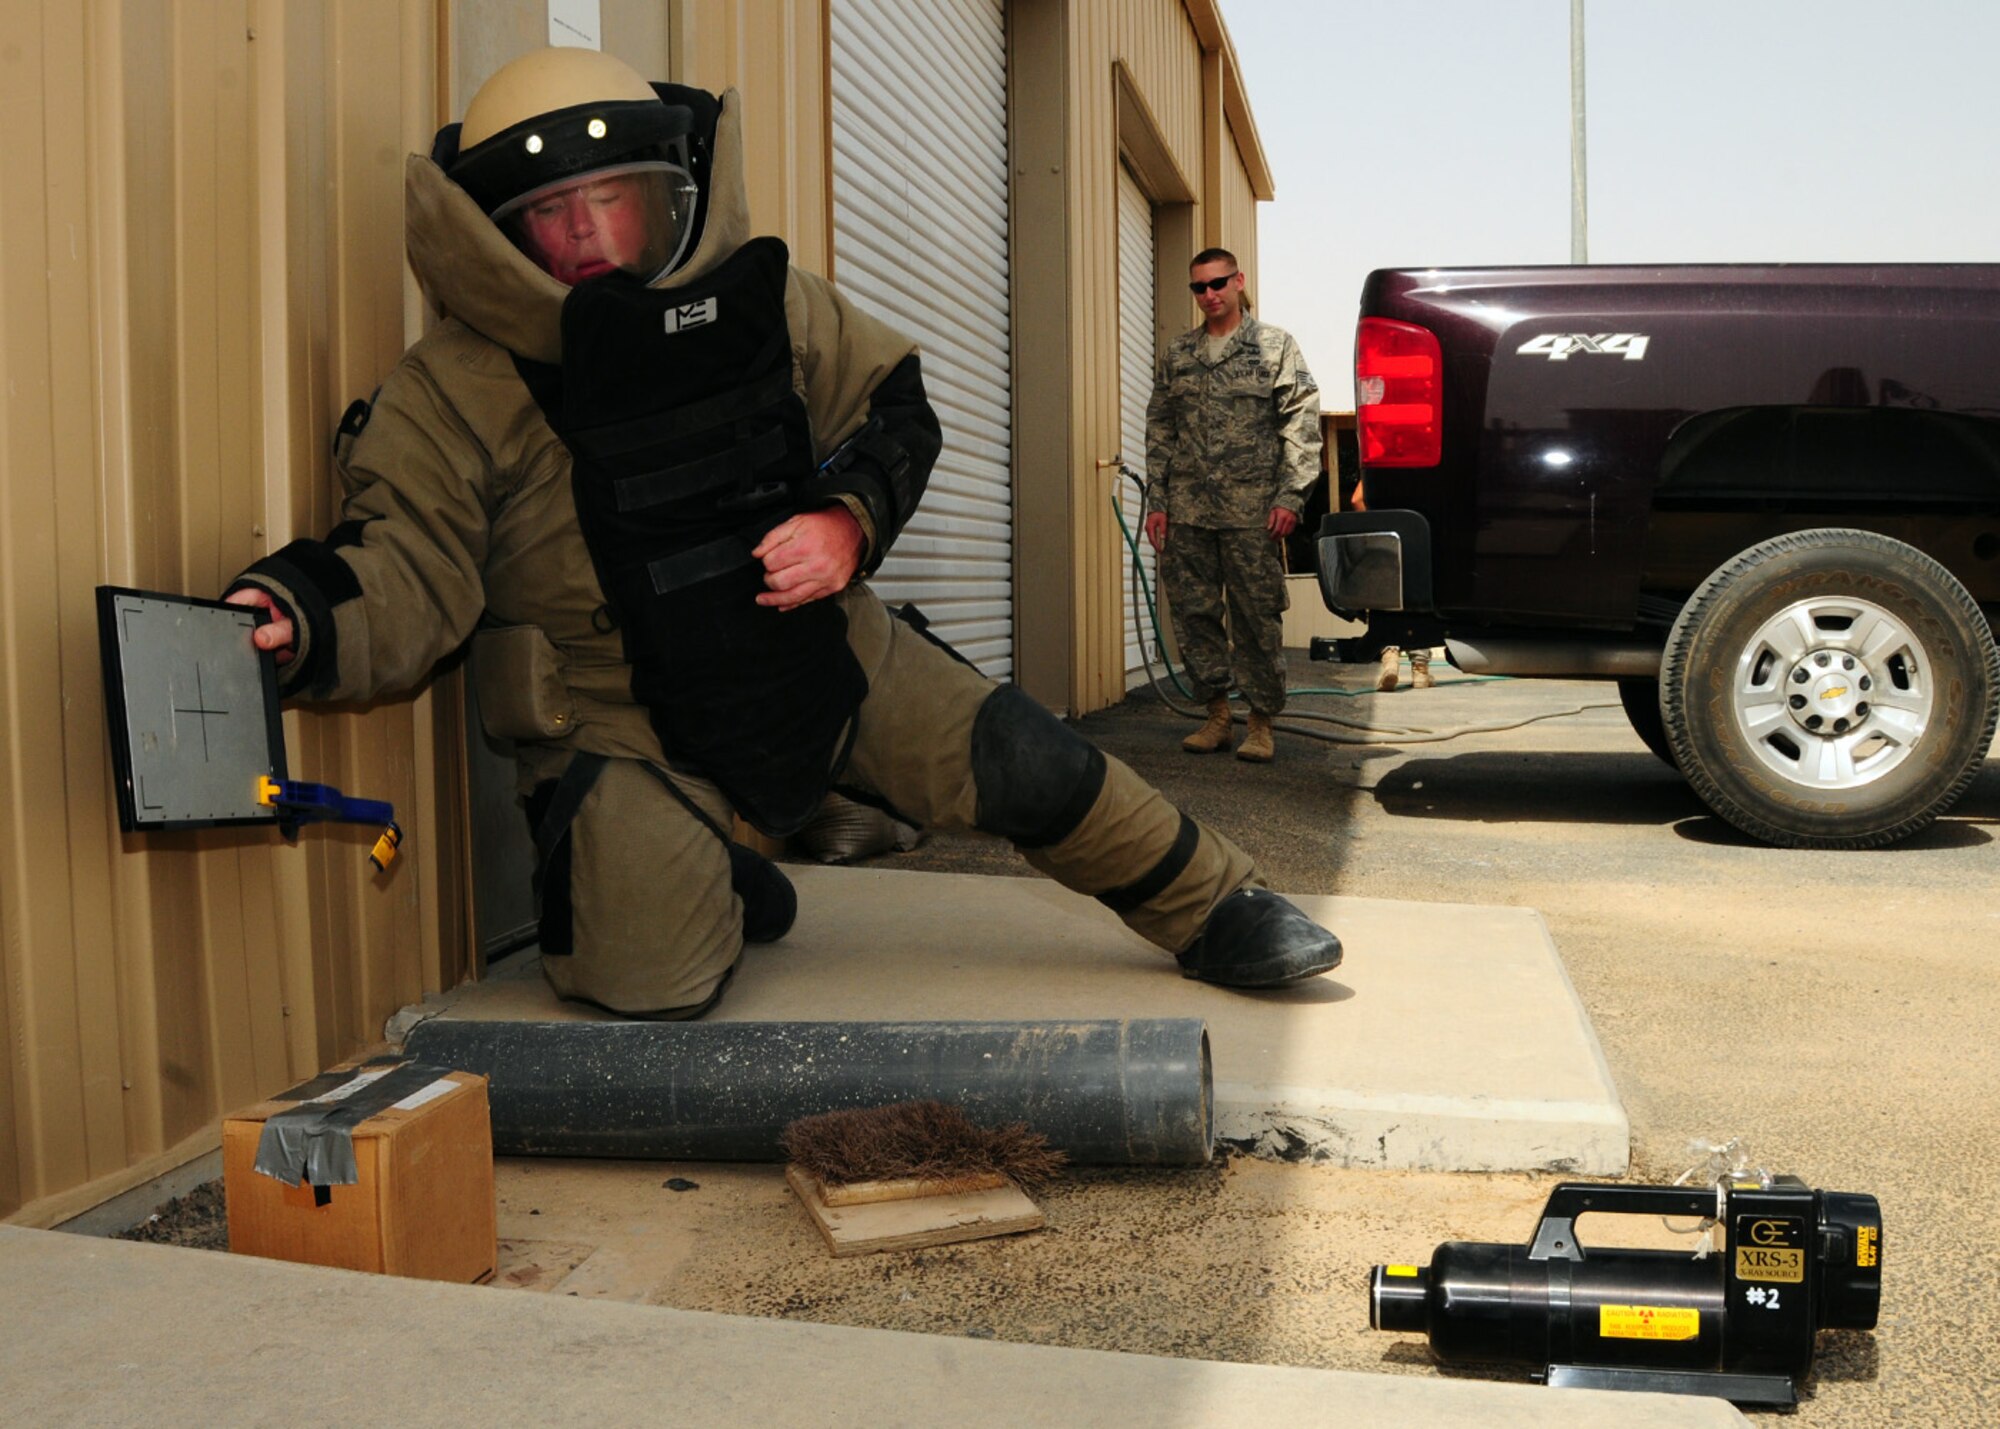 SOUTHWEST ASIA -- Tech. Sgt. Michael O'Toole, 386th Expeditionary Civil Engineer Squadron explosive ordnance disposal, emplaces an XRS-3 x-ray apparatus to examine a simulated suspicious package during training at an air base in Southwest Asia, May 27. The x-ray apparatus allows the explosive ordnance disposal personnel to determine what is in the suspicious package and the appropriate actions that need to be taken. Sergeant O'Toole is deployed from Luke Air Force Base, Ariz., and is originally from East Durham, N.Y. (U.S. Air Force photo/ Senior Airman Courtney Richardson)